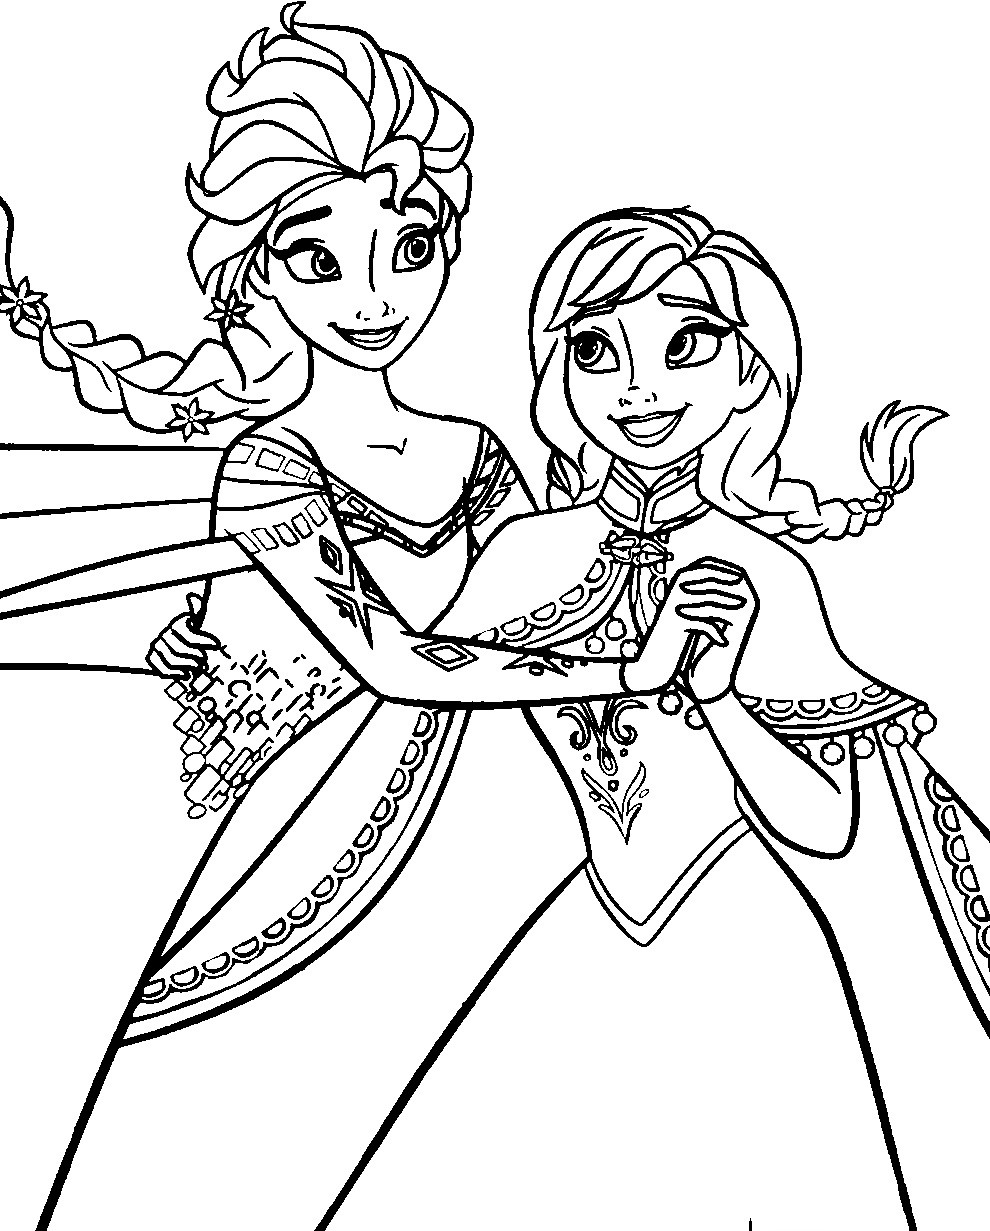 Frozen Coloring Pages Free Printable
 Disney Frozen Coloring Pages To Download